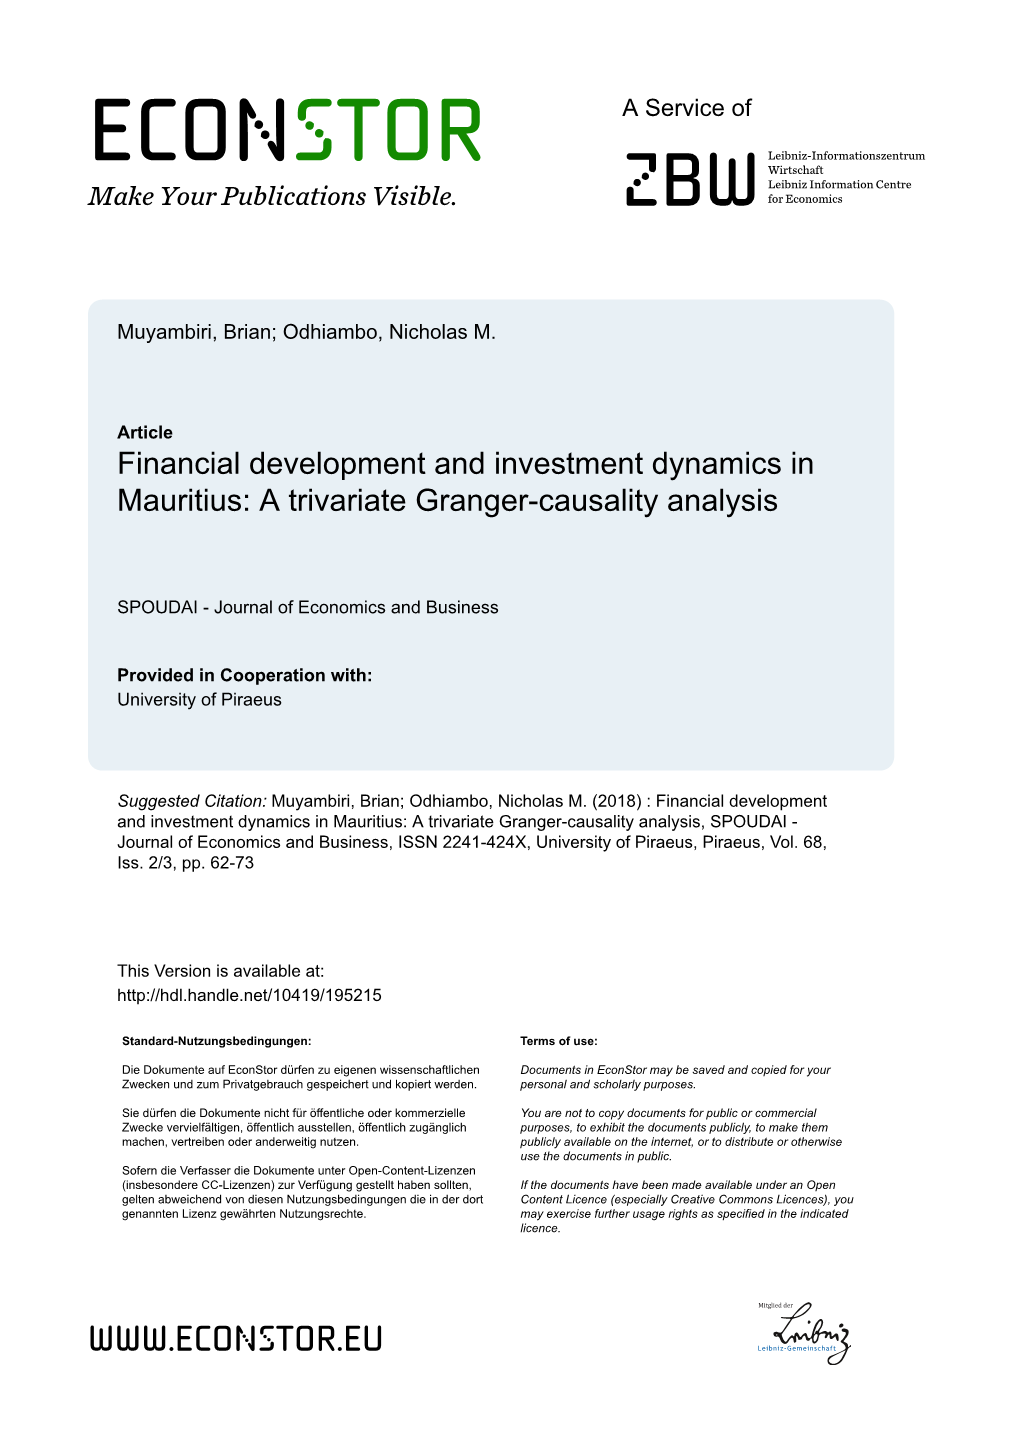 Financial Development and Investment Dynamics in Mauritius: a Trivariate Granger-Causality Analysis